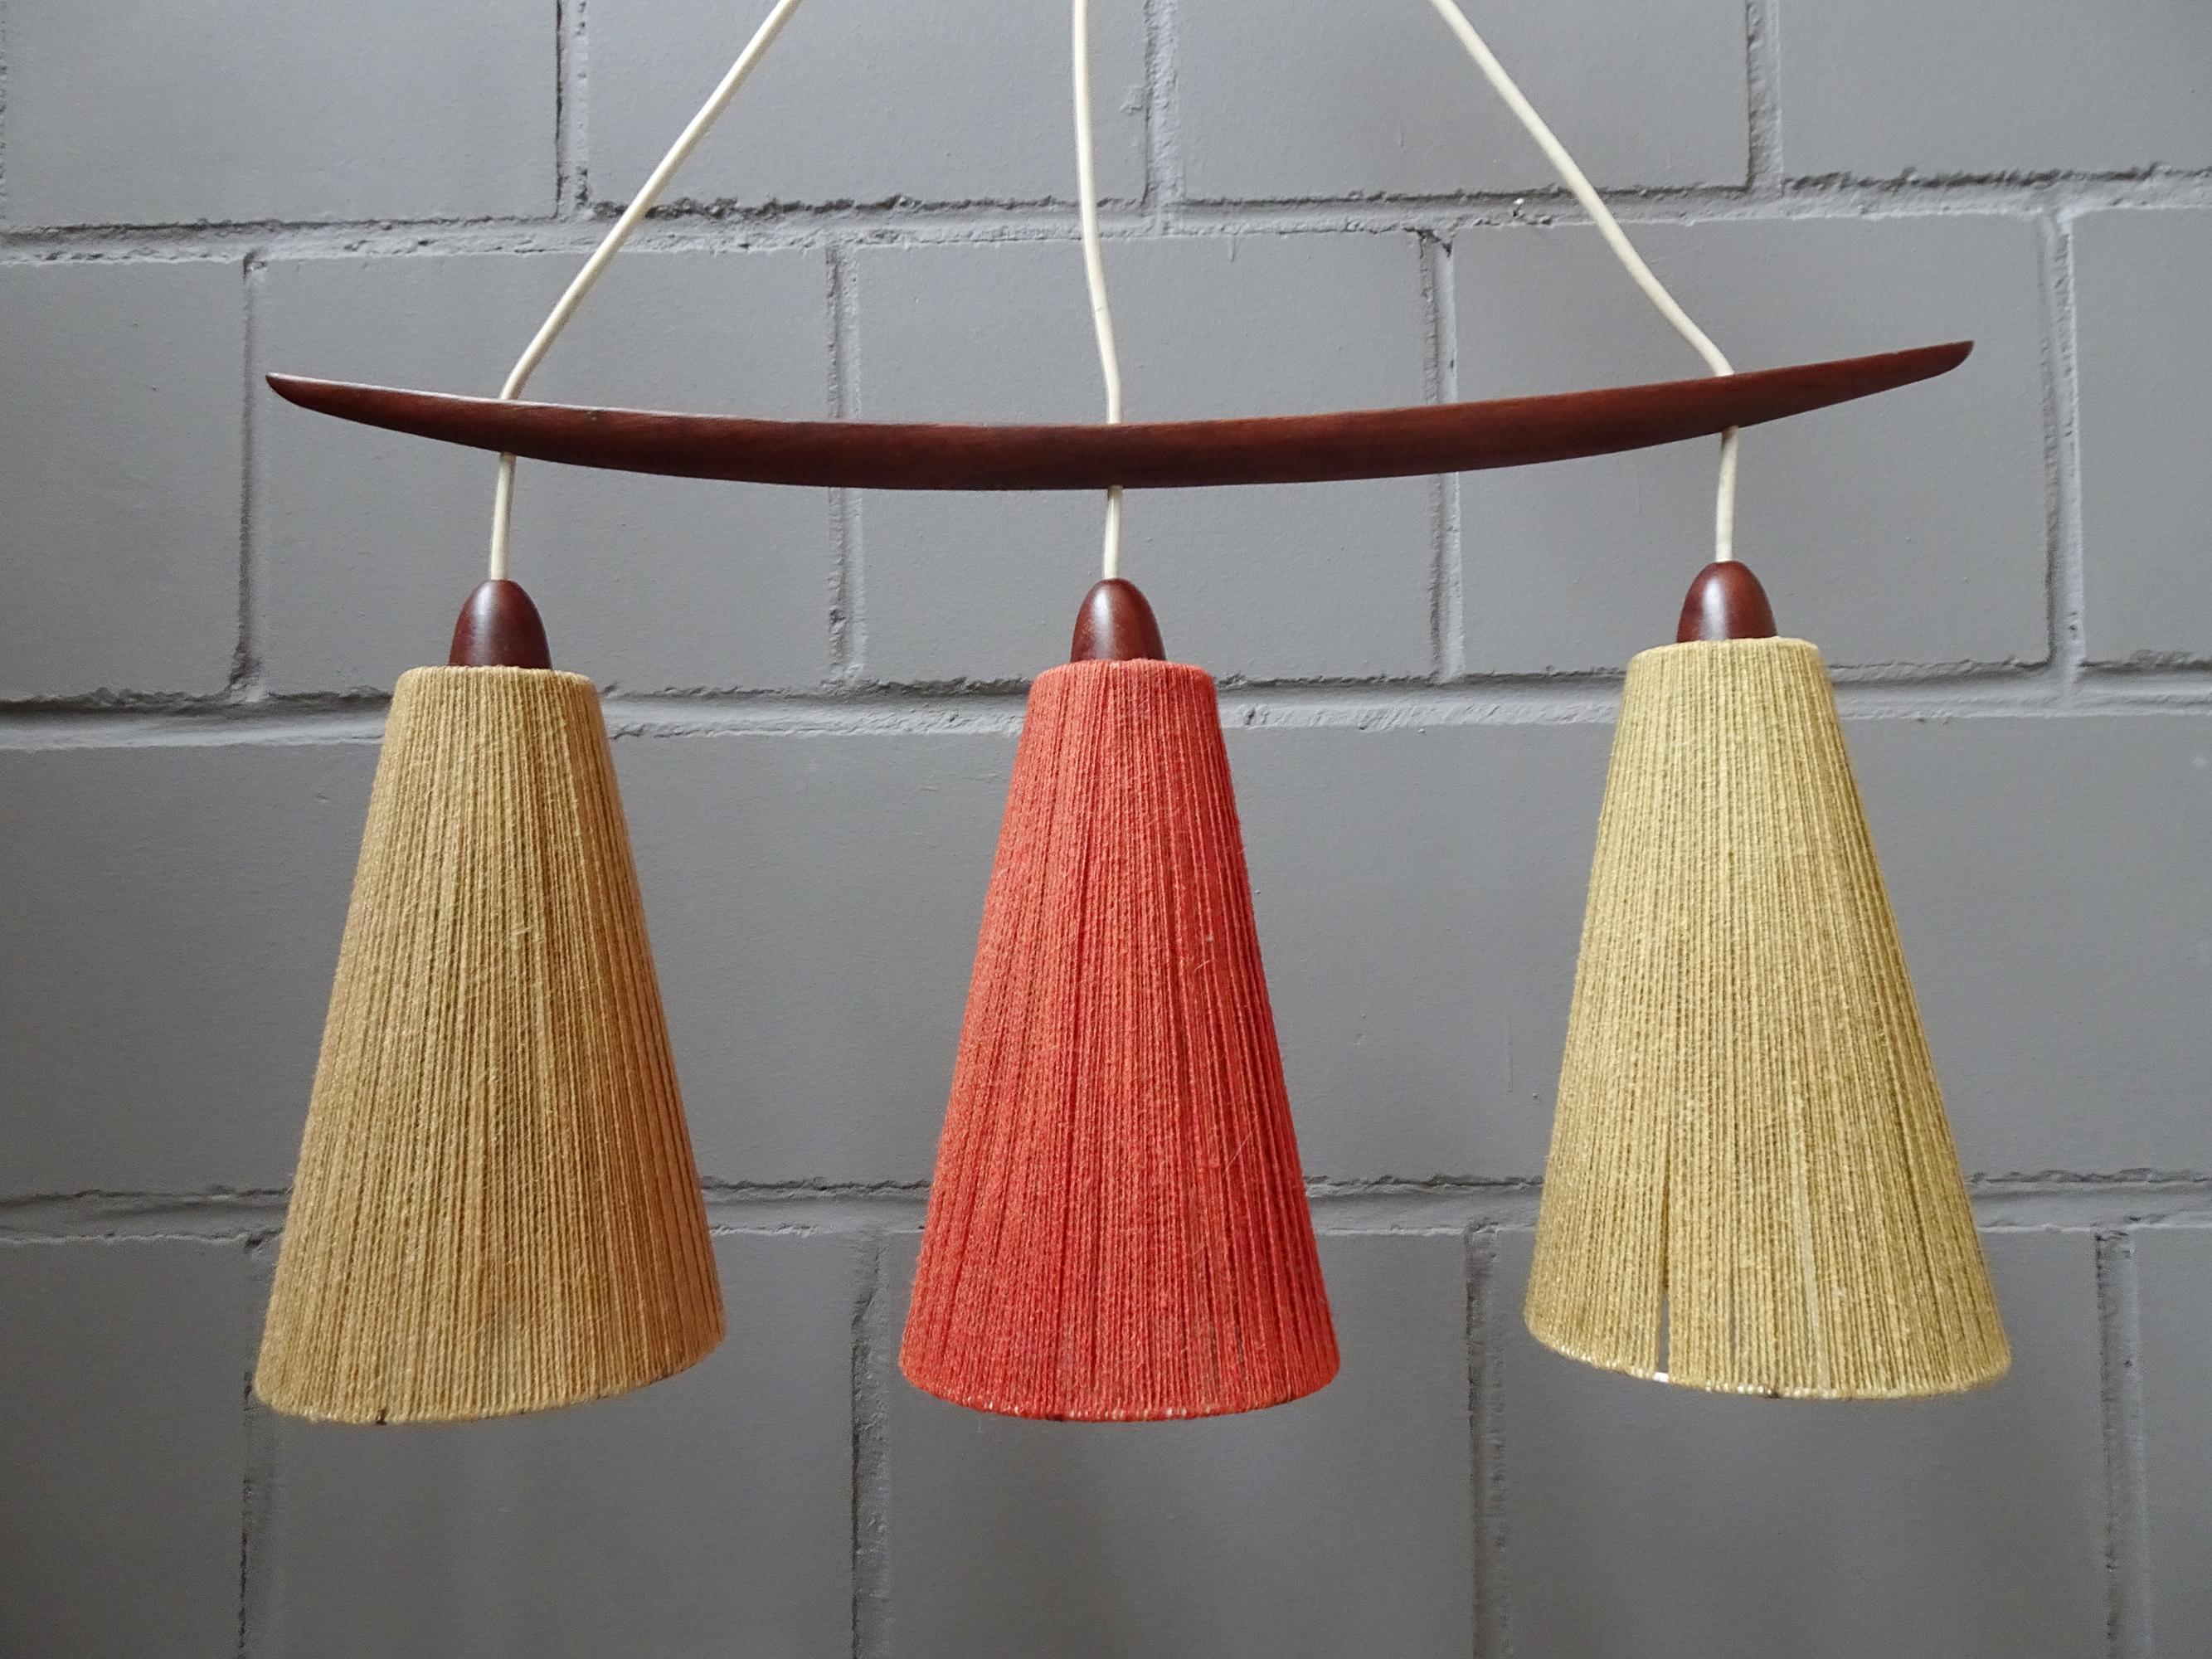 Midcentury Teak and Cord Shade Chandelier by Temde, Germany, 1960 For Sale 4